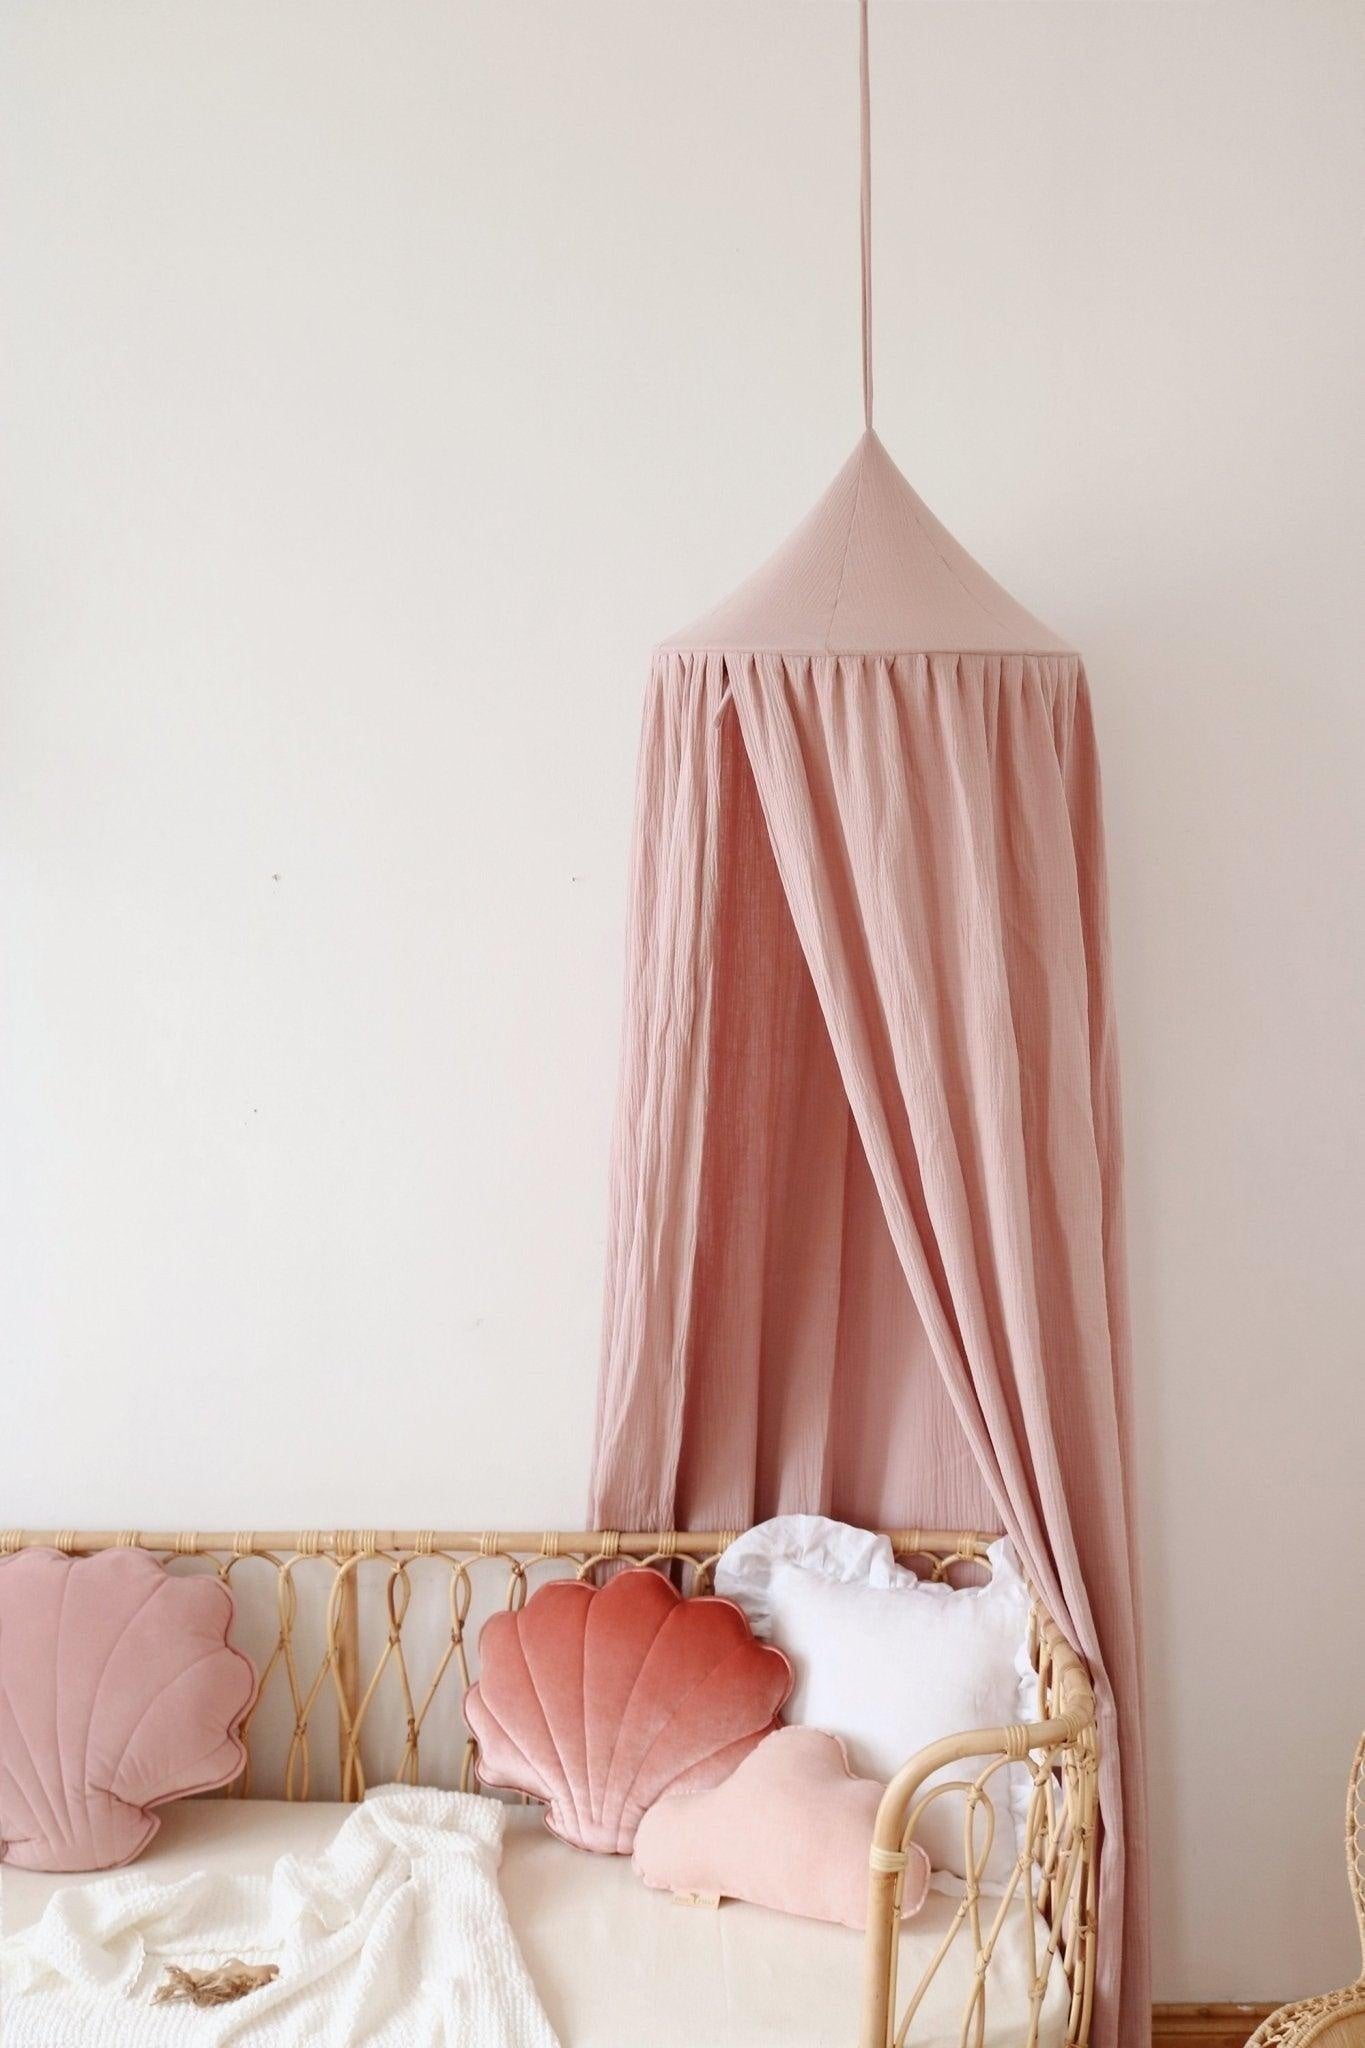 “Baby pink” Canopy by Moi Mili